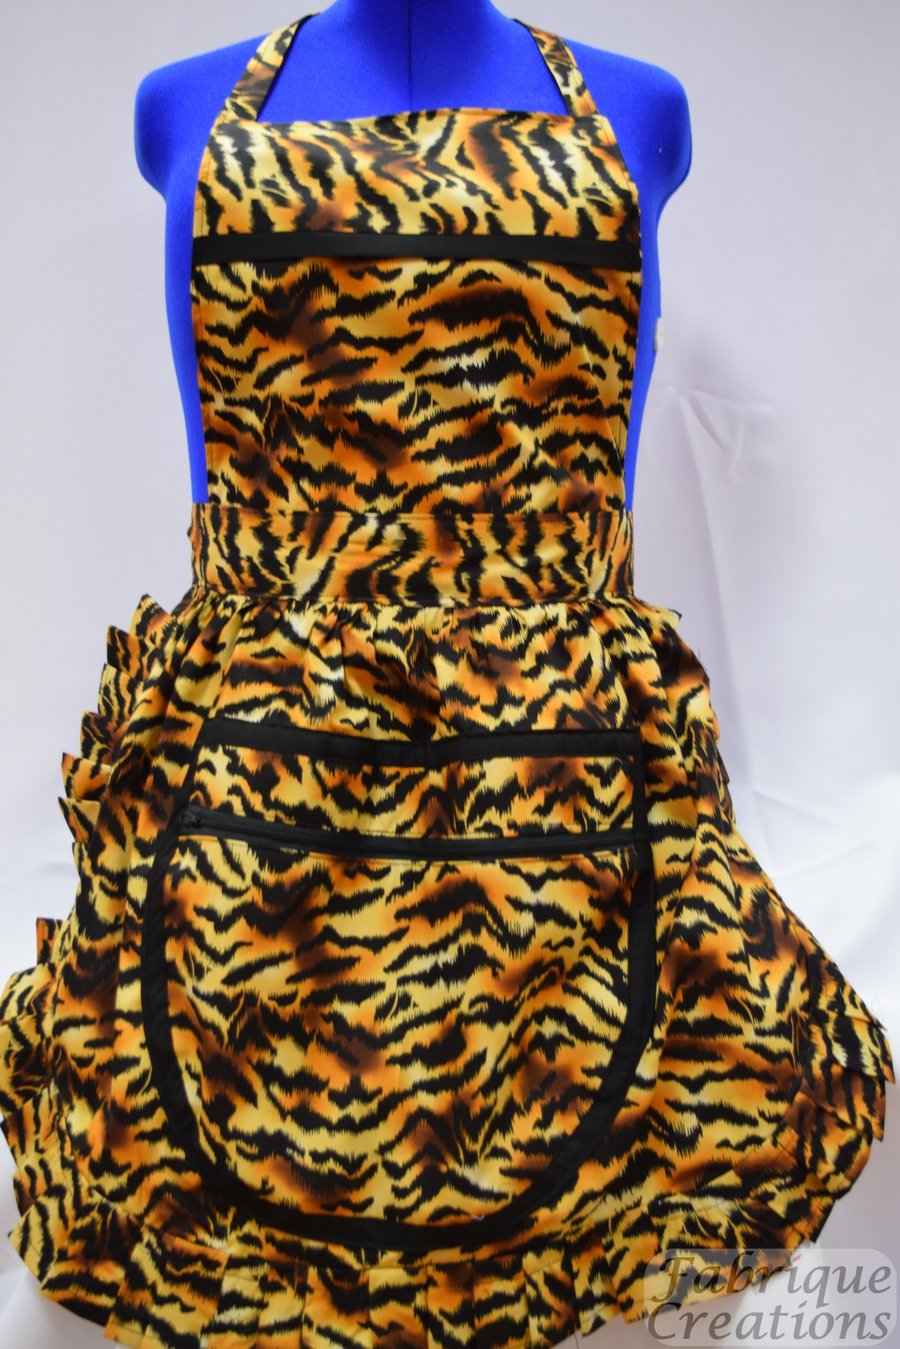 Vintage 50s Style Full Apron with Large Zipped Pocket - Tiger Stripe Print (B)